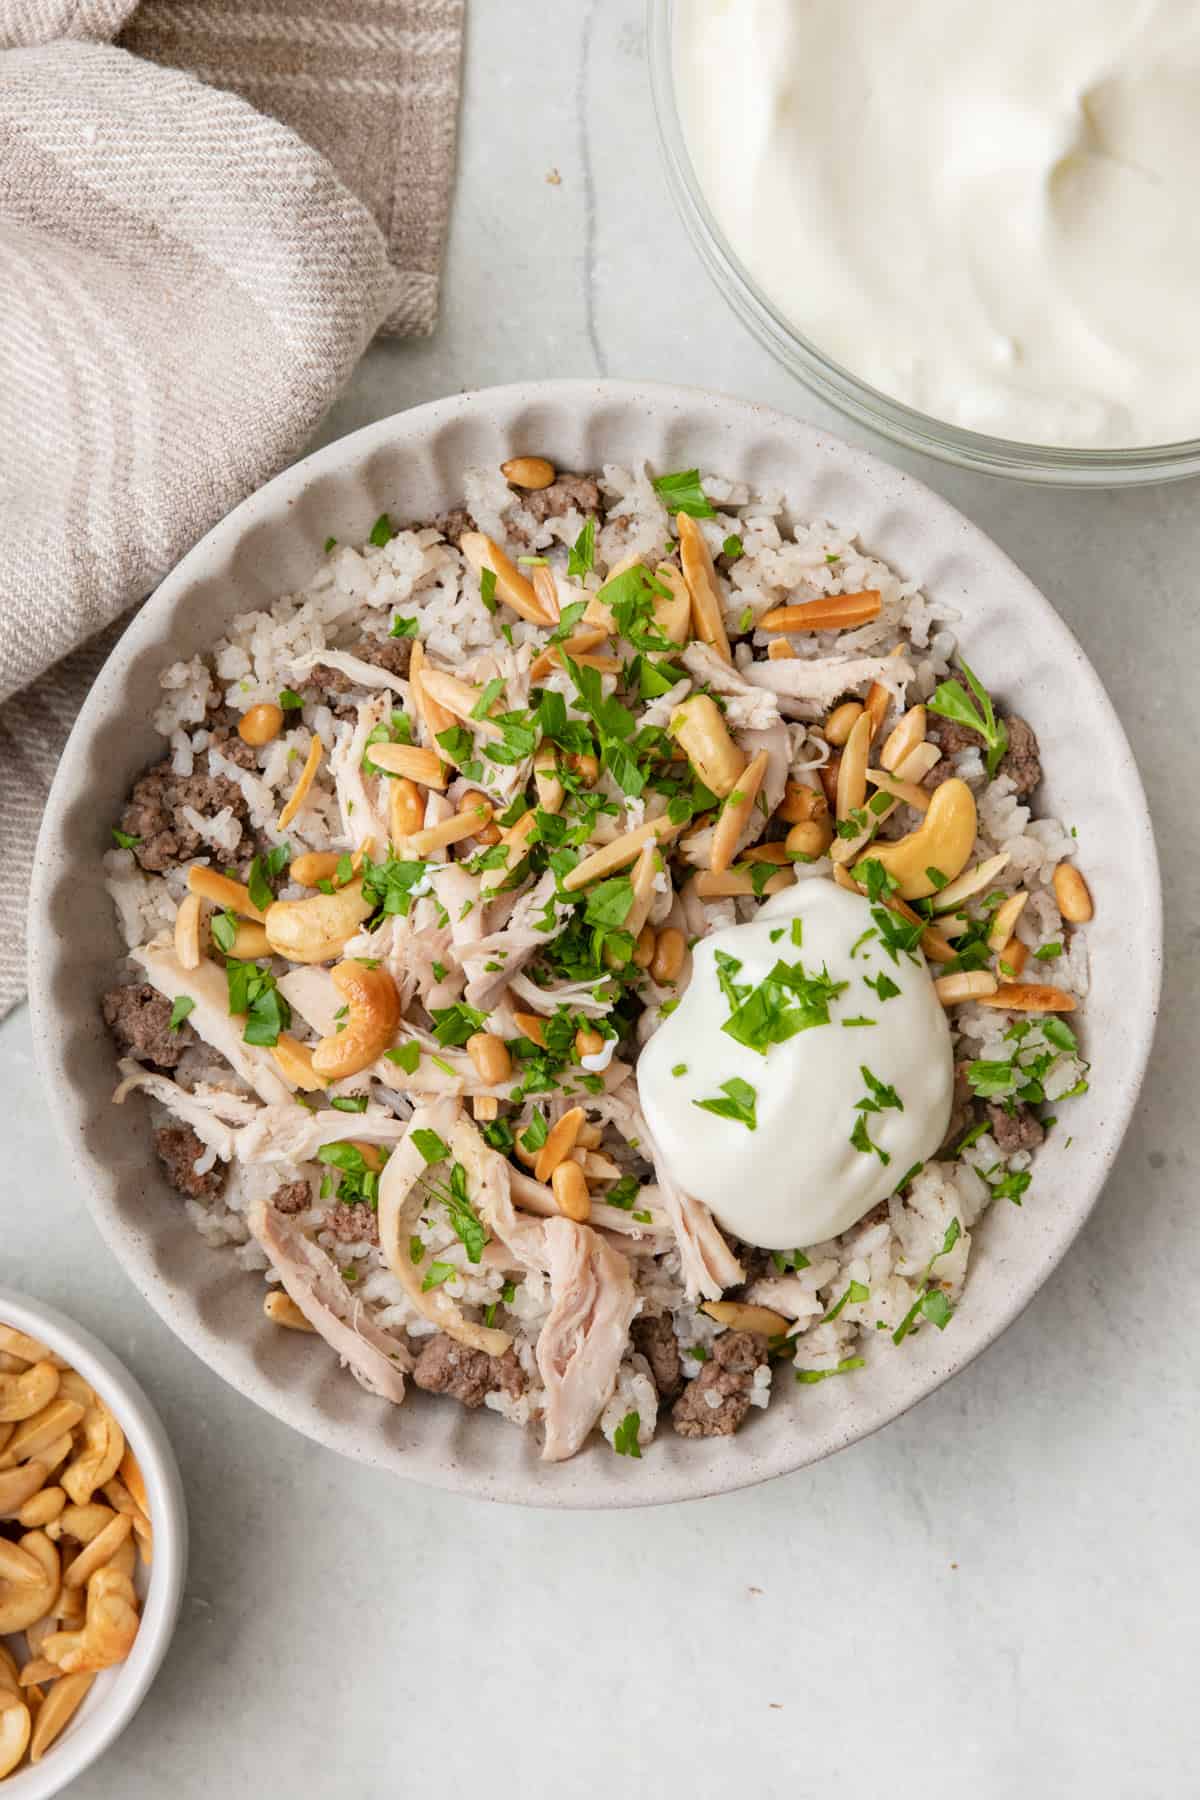 Lebanese chicken and rice topped with toasted nuts, homemade yogurt, and fresh herbs.